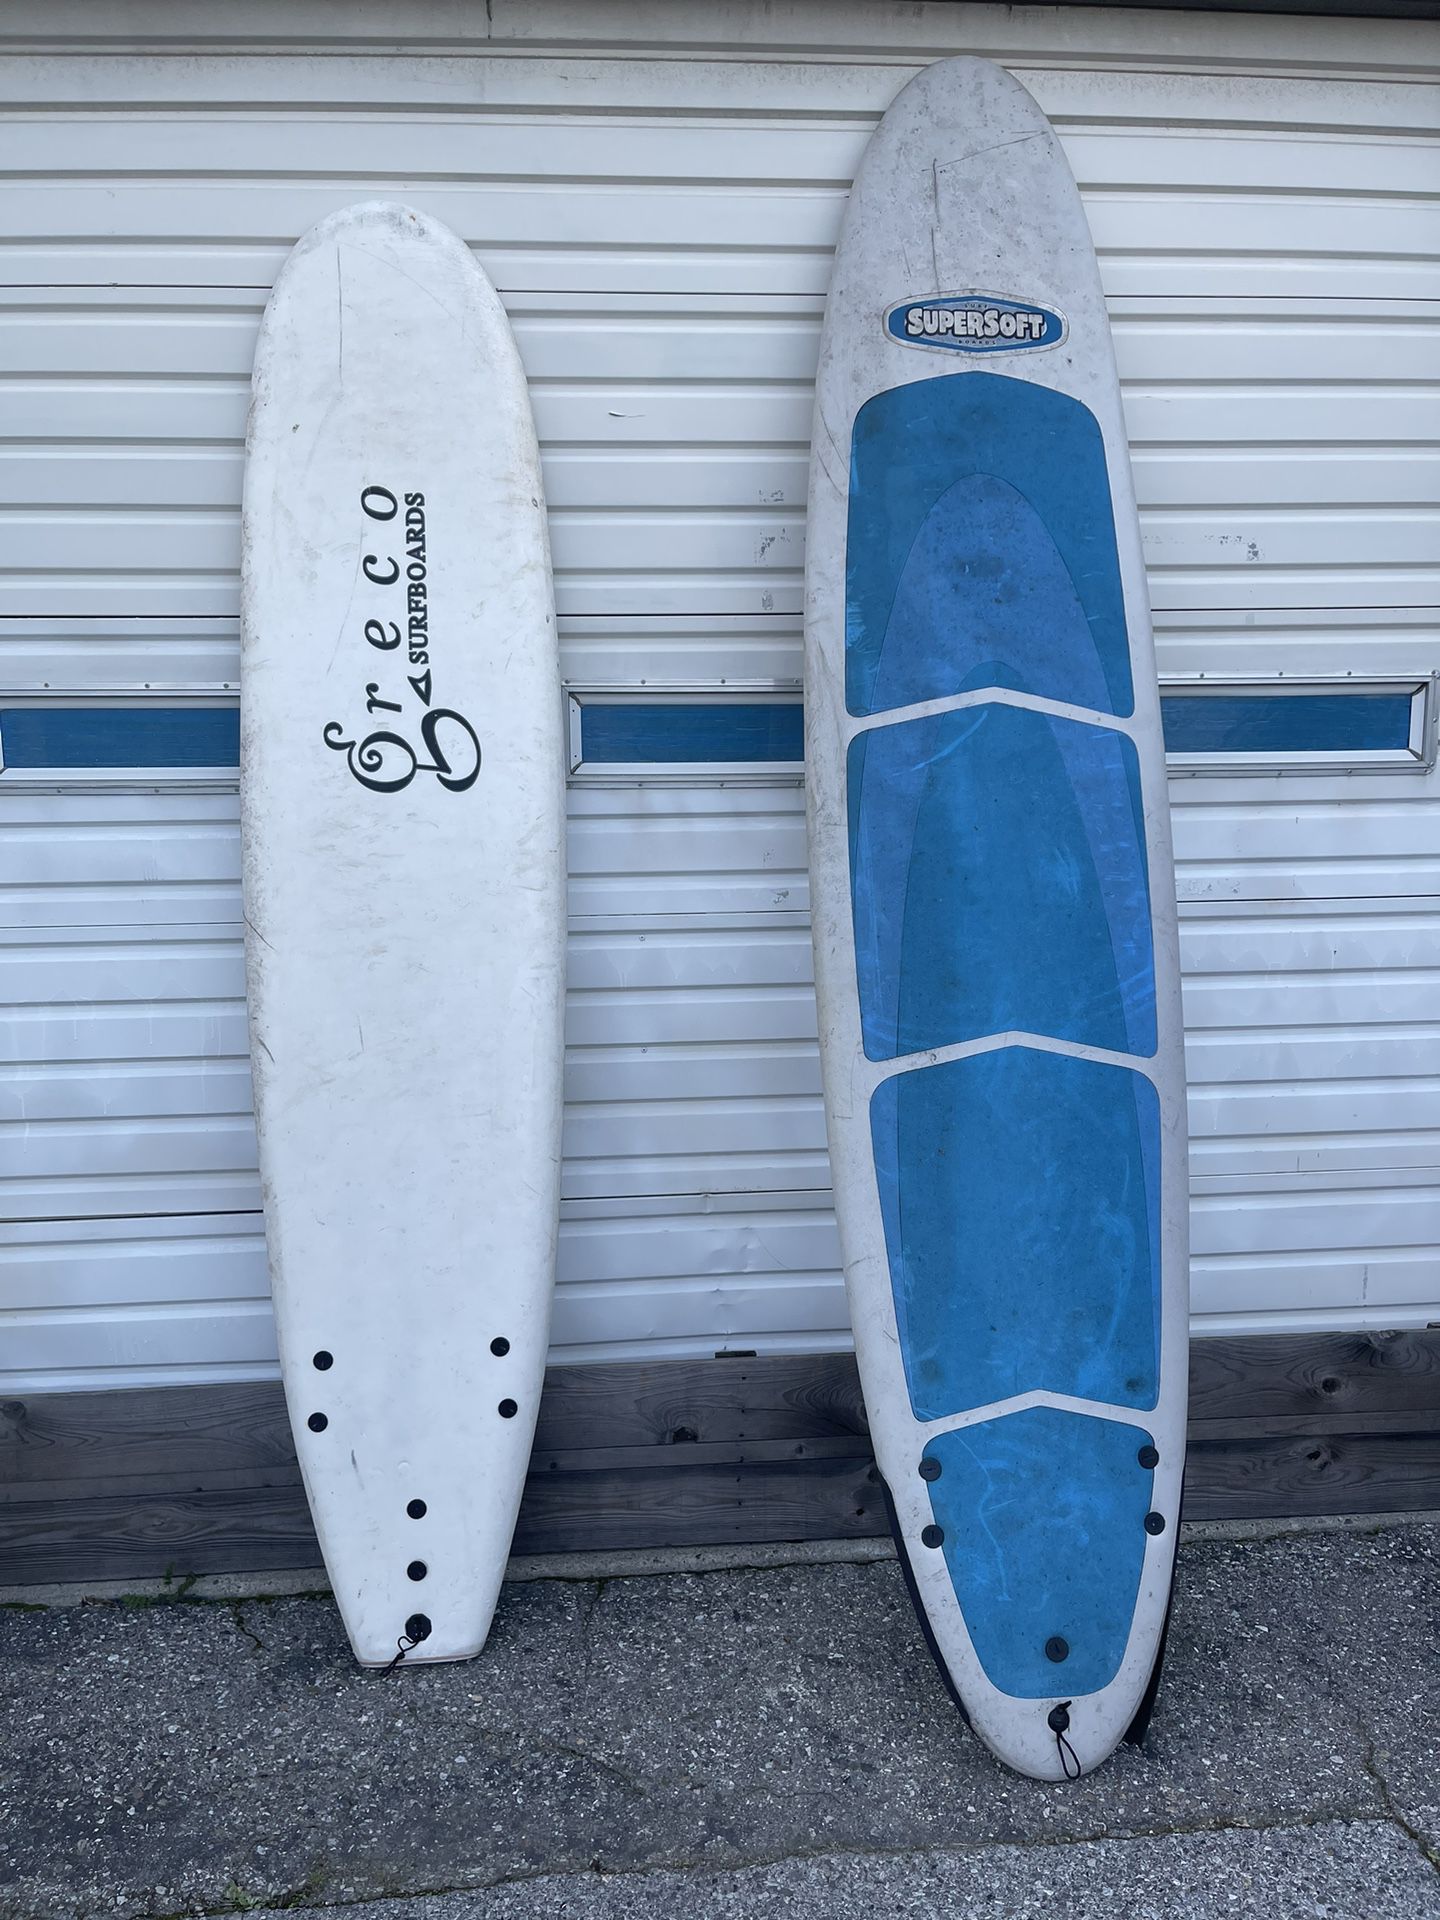 1 Surfboard Greco, Super Soft Surfboard Qty 1